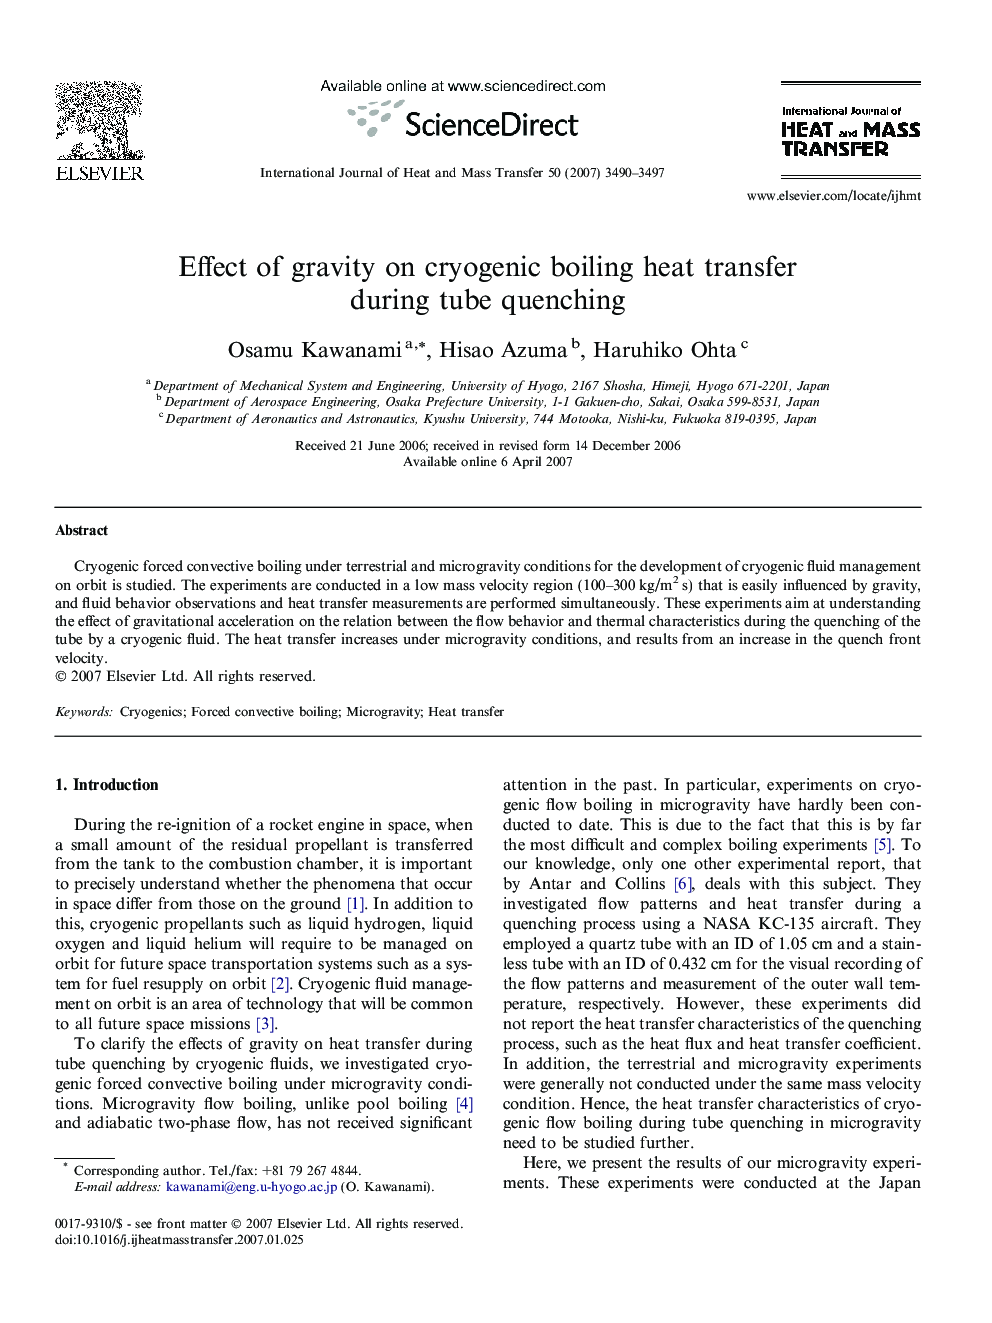 Effect of gravity on cryogenic boiling heat transfer during tube quenching